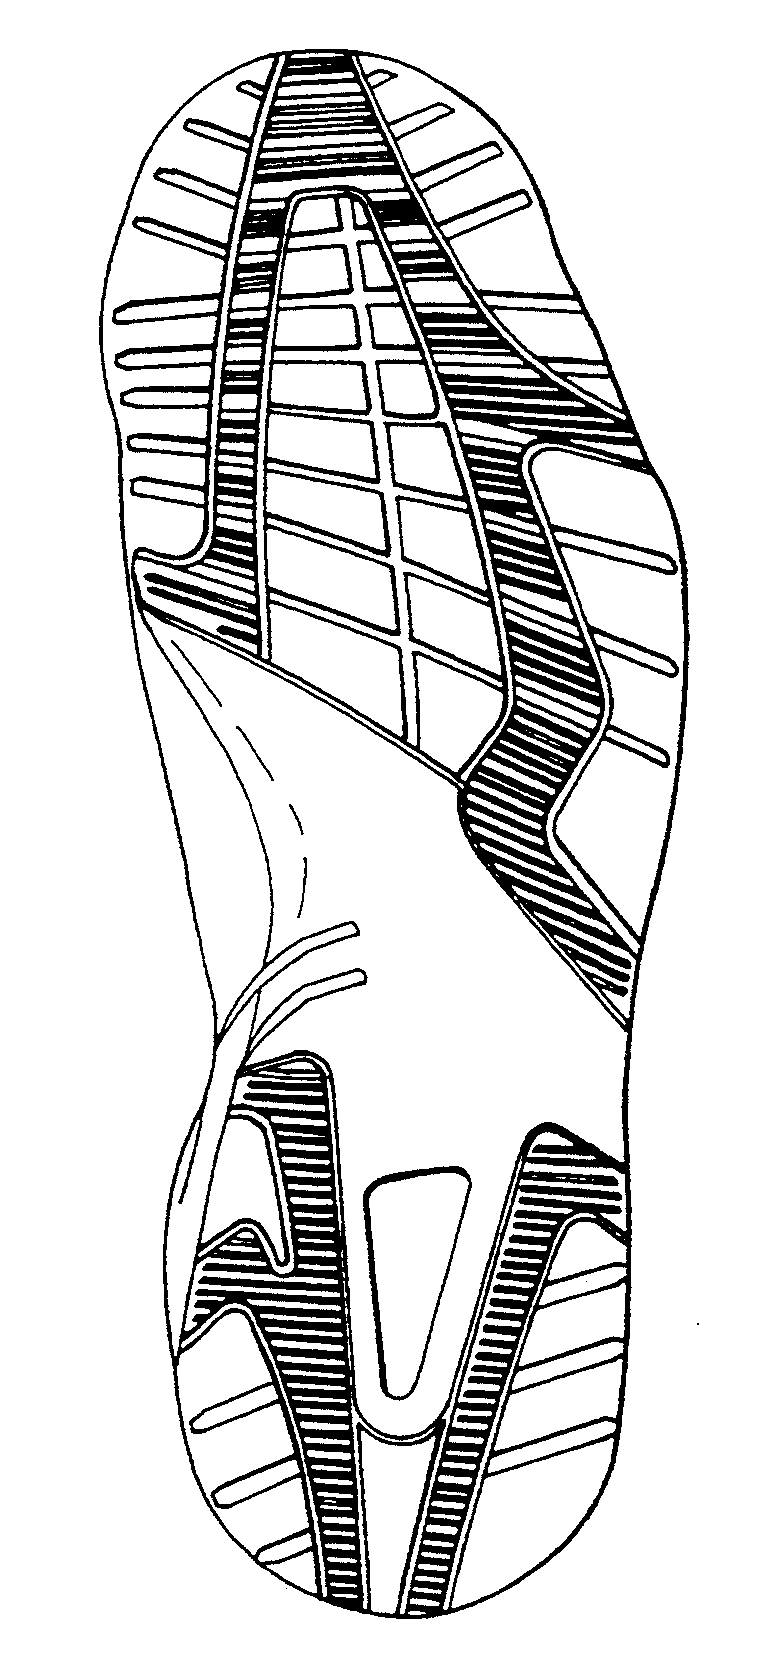 A typical example of  a sole with a polygonal elememt.
